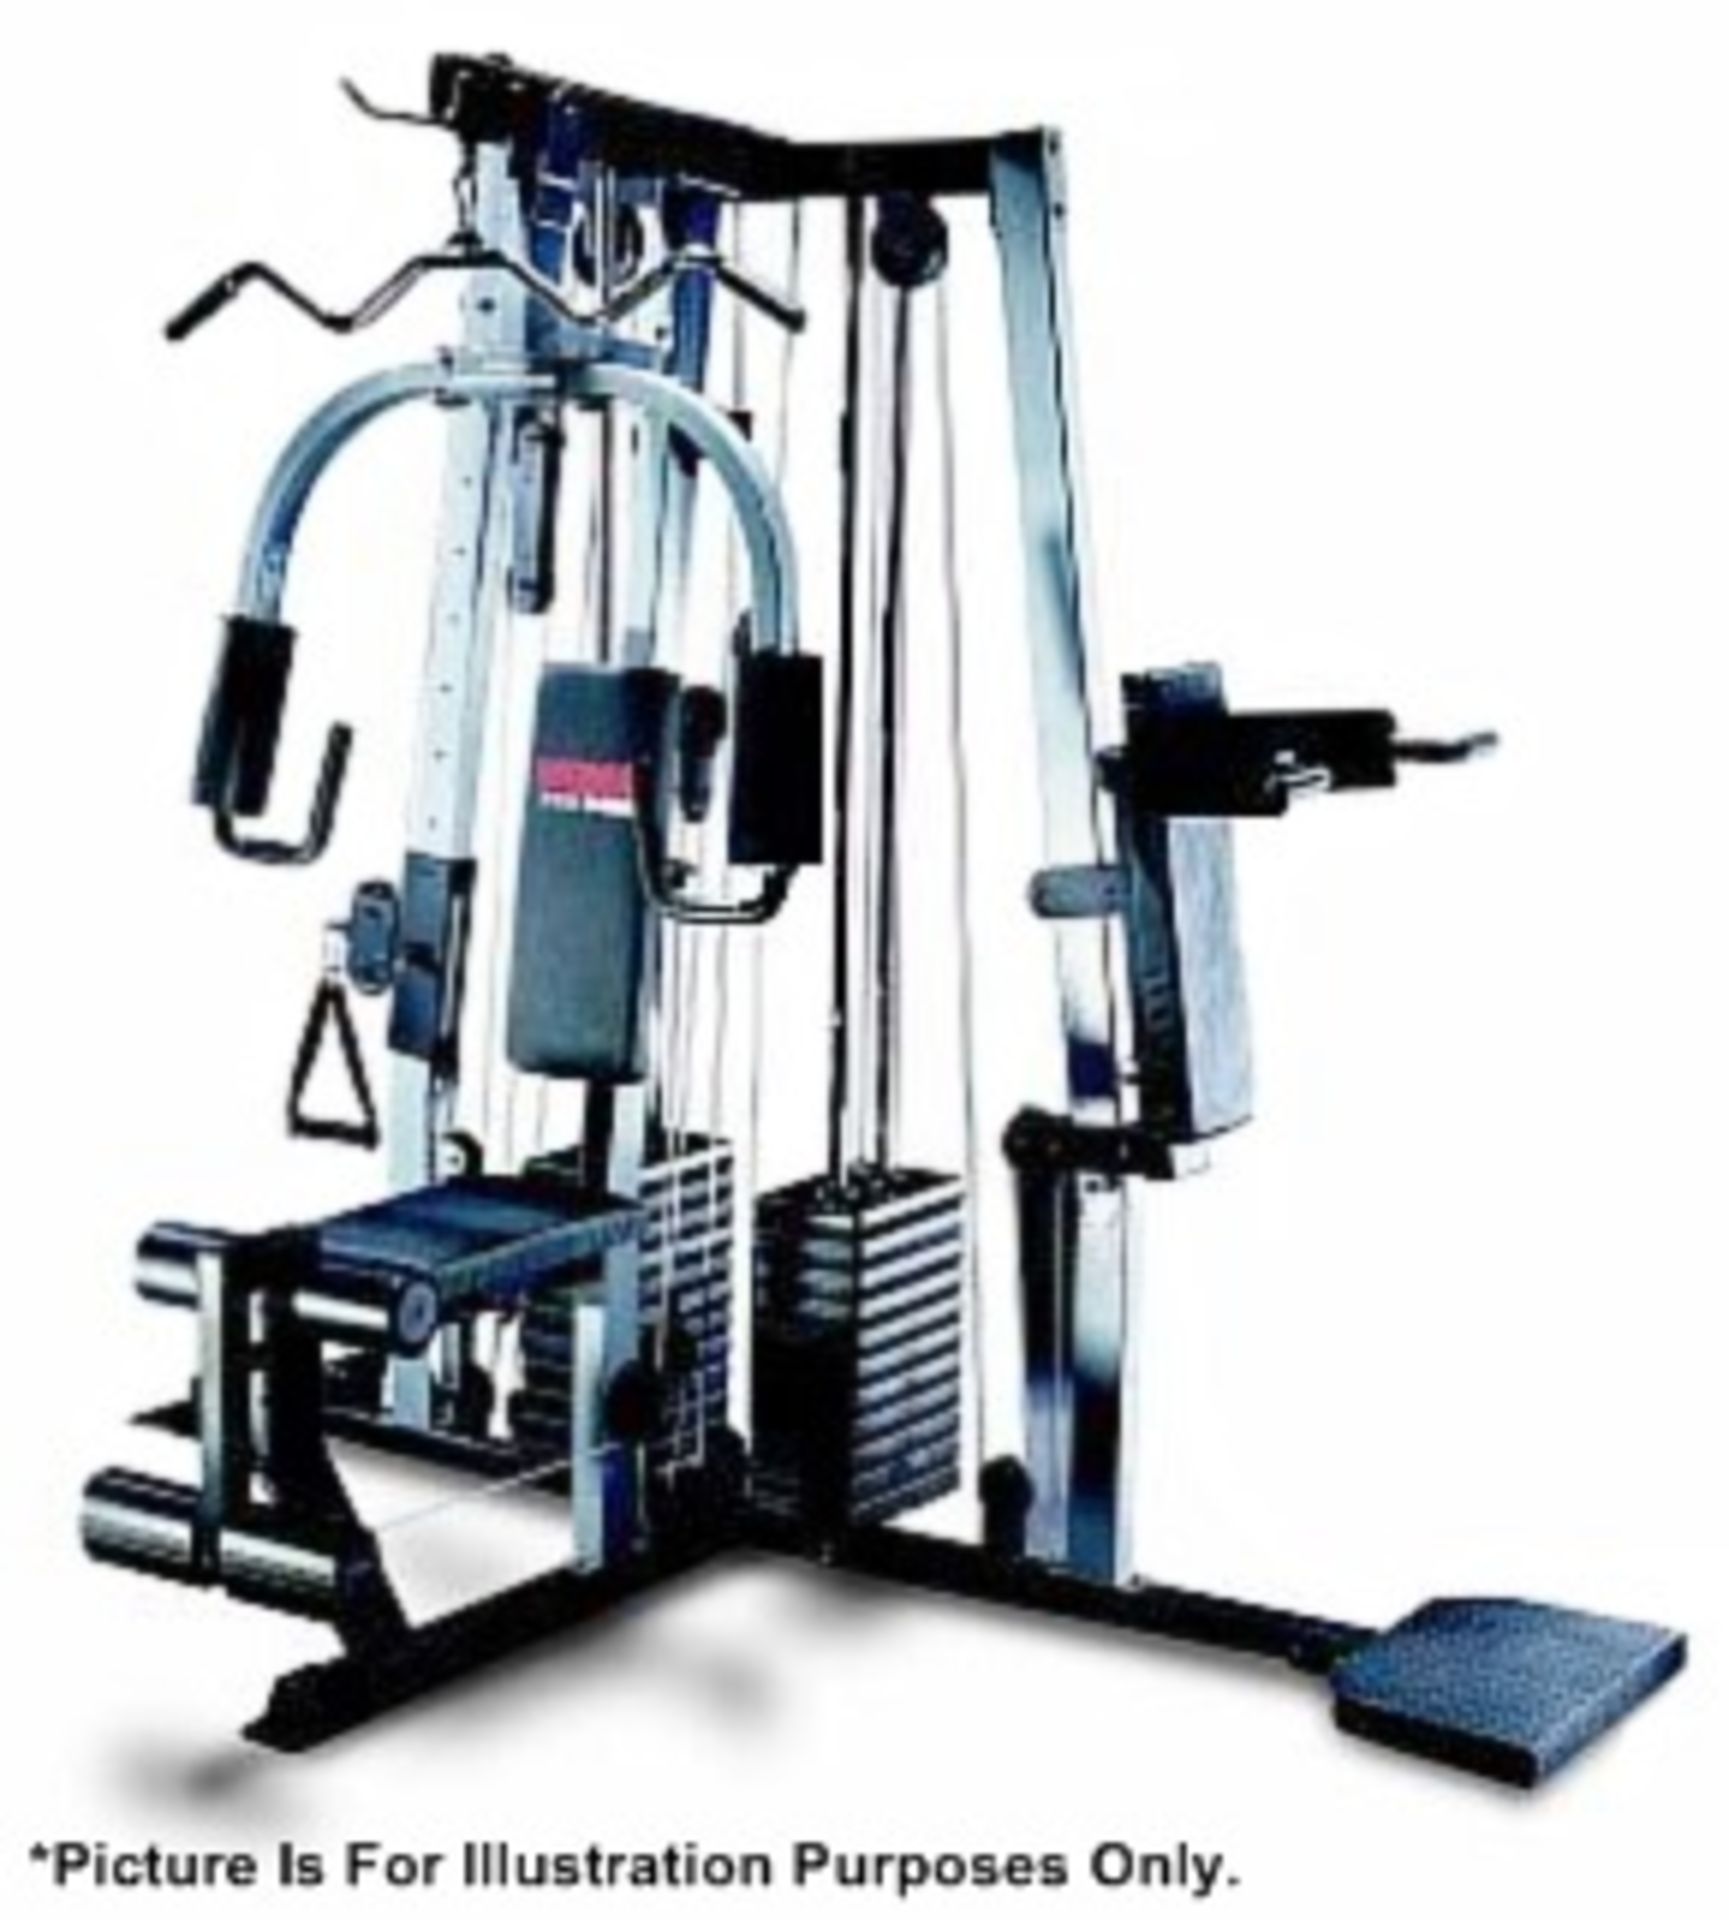 1 x Weider Pro 9400 Multi Gym - From A Clean Manor House Environment In Good Working Condition -